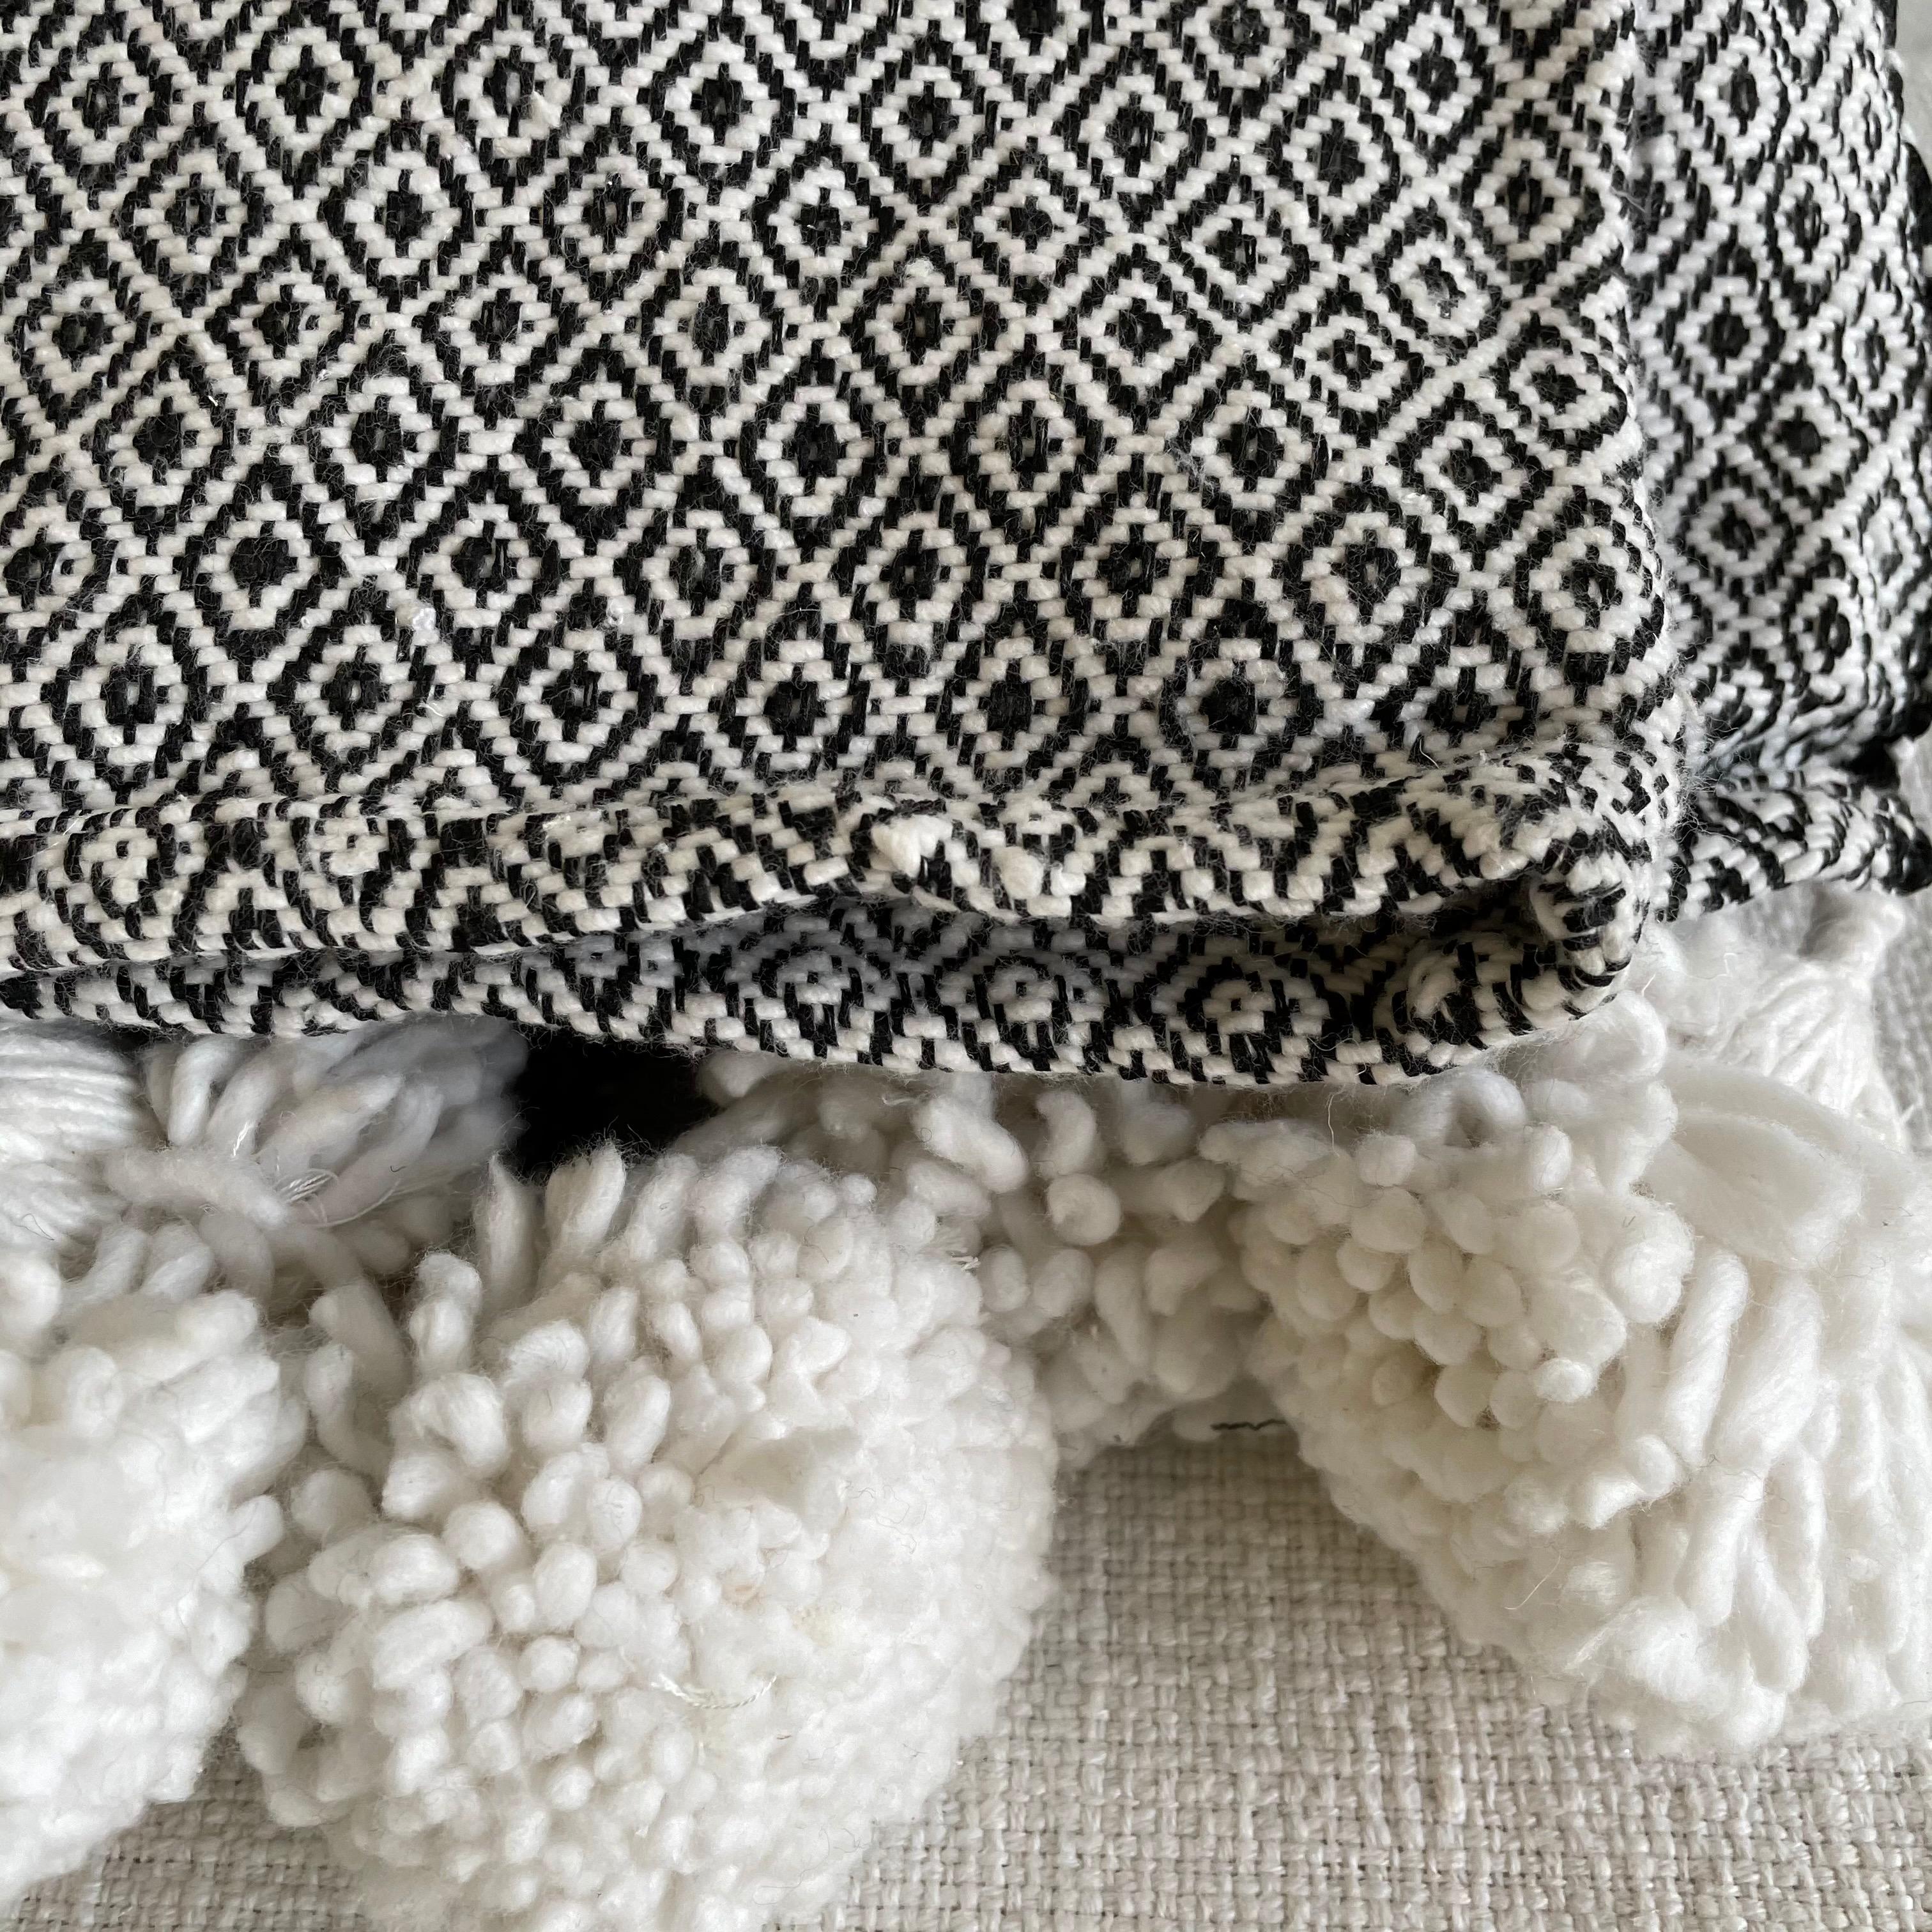 French cotton throw with tassels
Custom loomed in france for Bloom Home Inc.
This black and white diamond pattern throw has a heavy weight to it.
Measures: 72 x 108.